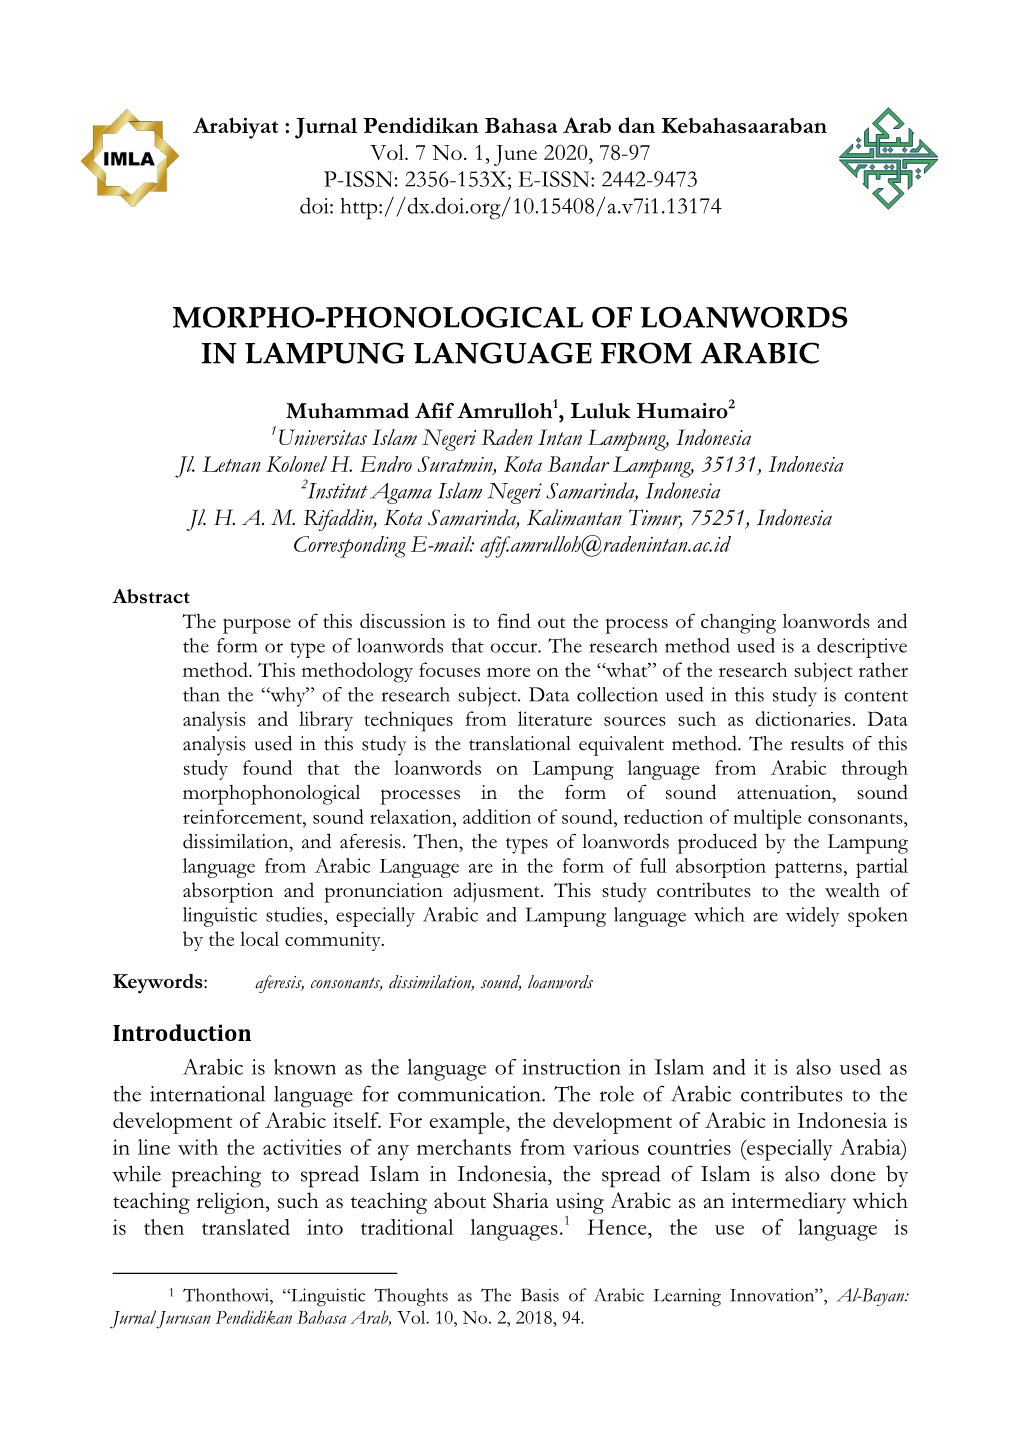 Morpho-Phonological of Loanwords in Lampung Language from Arabic